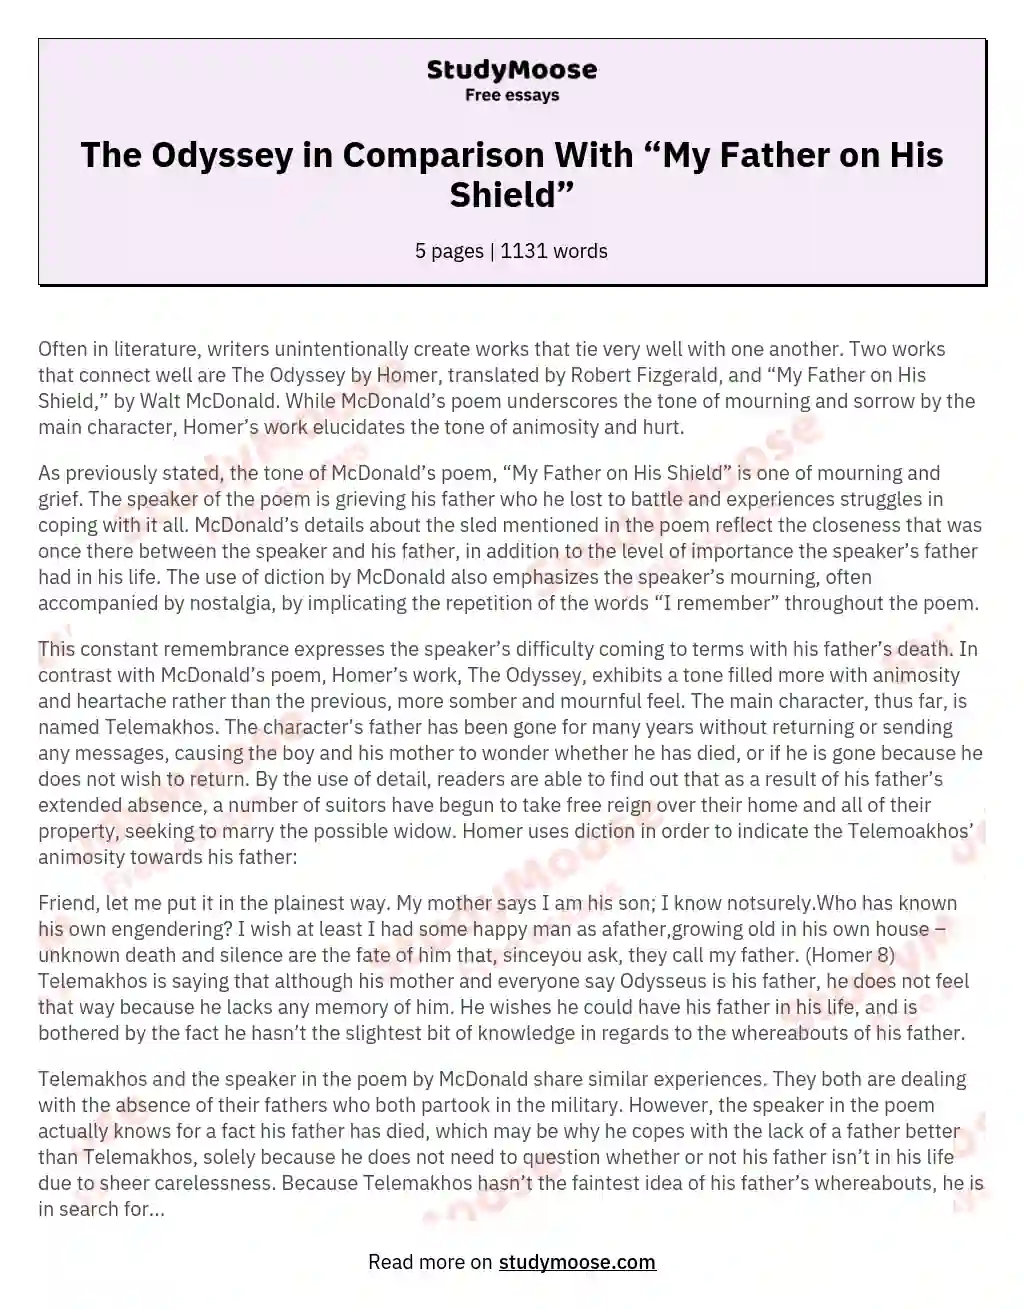 The Odyssey in Comparison With “My Father on His Shield”